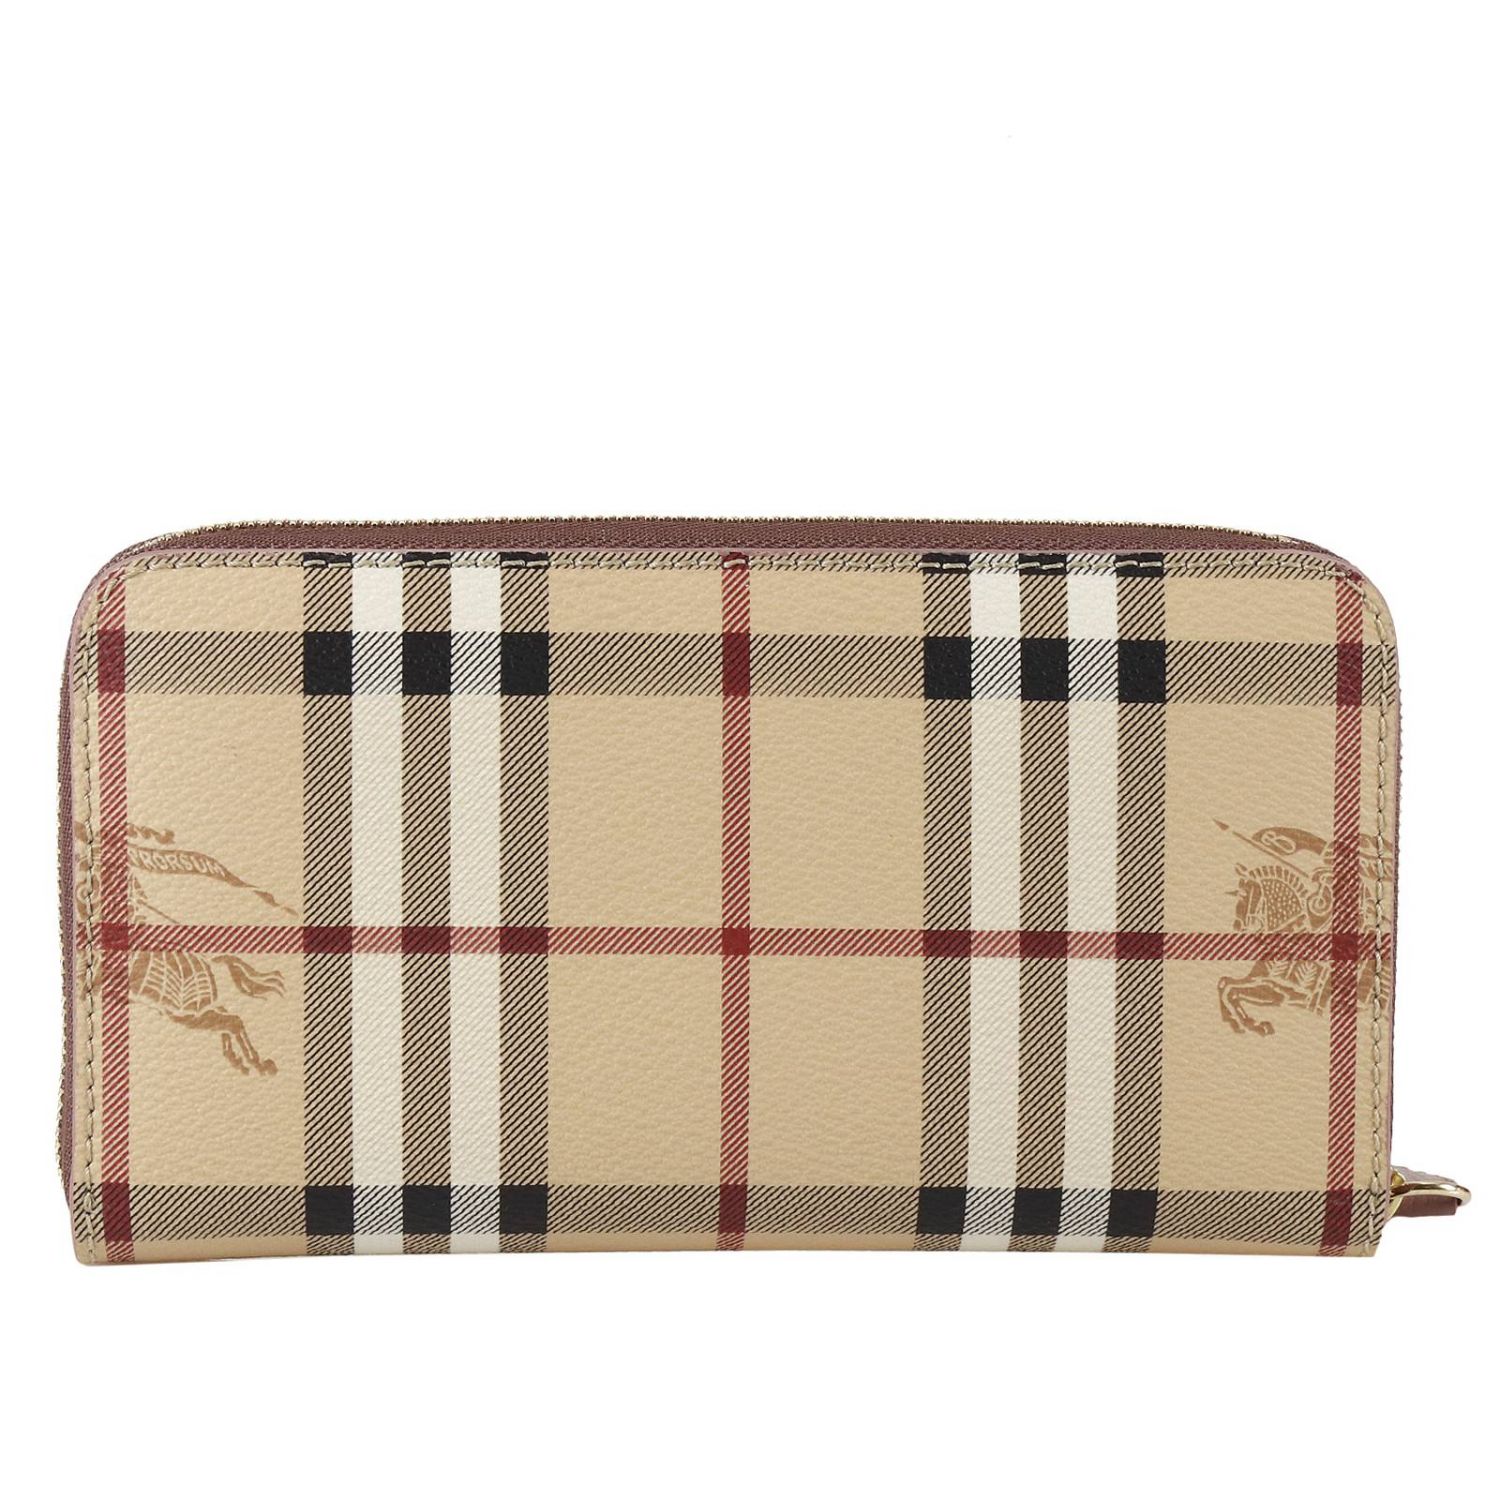 Burberry Outlet: Wallet women - Pink | Wallet Burberry 4060696 GIGLIO.COM